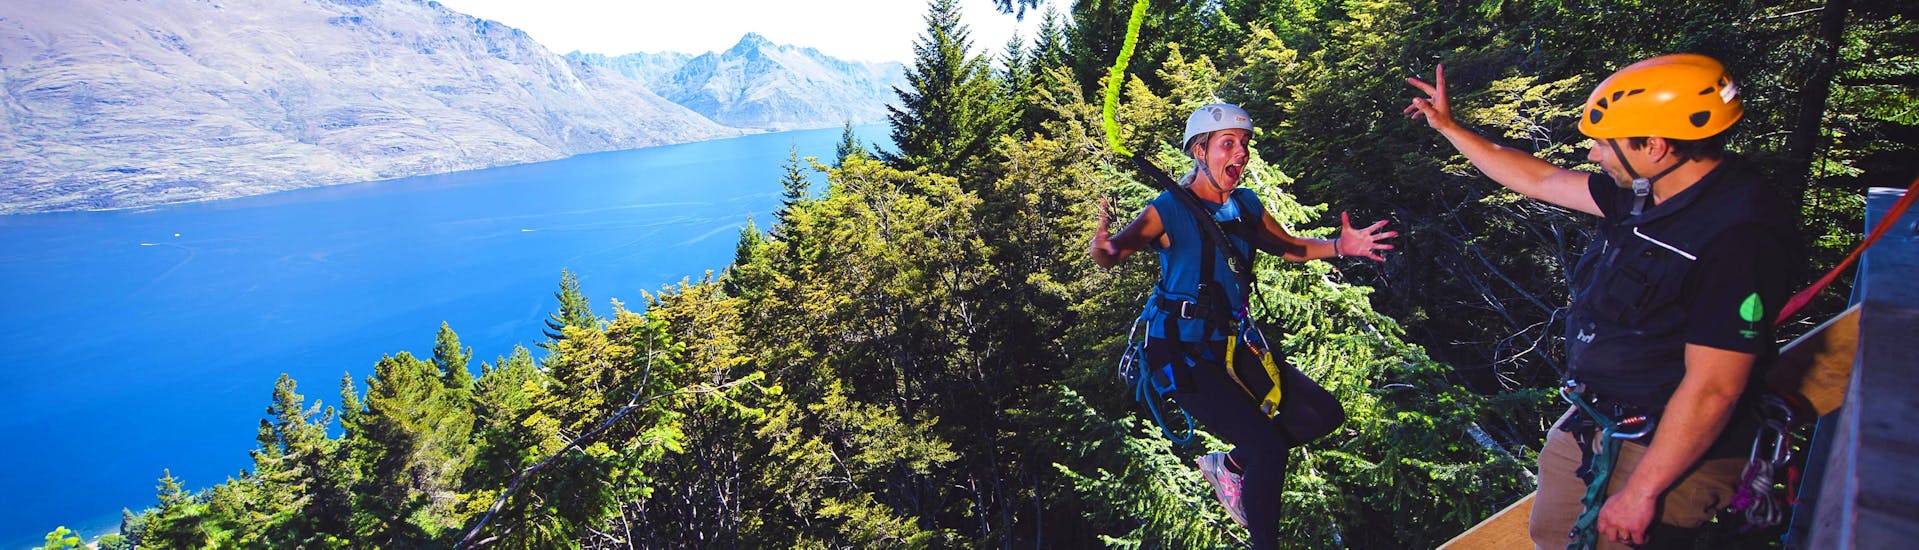 A girl looks at the difference in altitude below her, soon he will jump 21 m, which is the highlight of the Zipline route in Queenstown - Kereru: 2 Ziplines and 21 m Drop of Ziptrek Ecotours Queenstown.